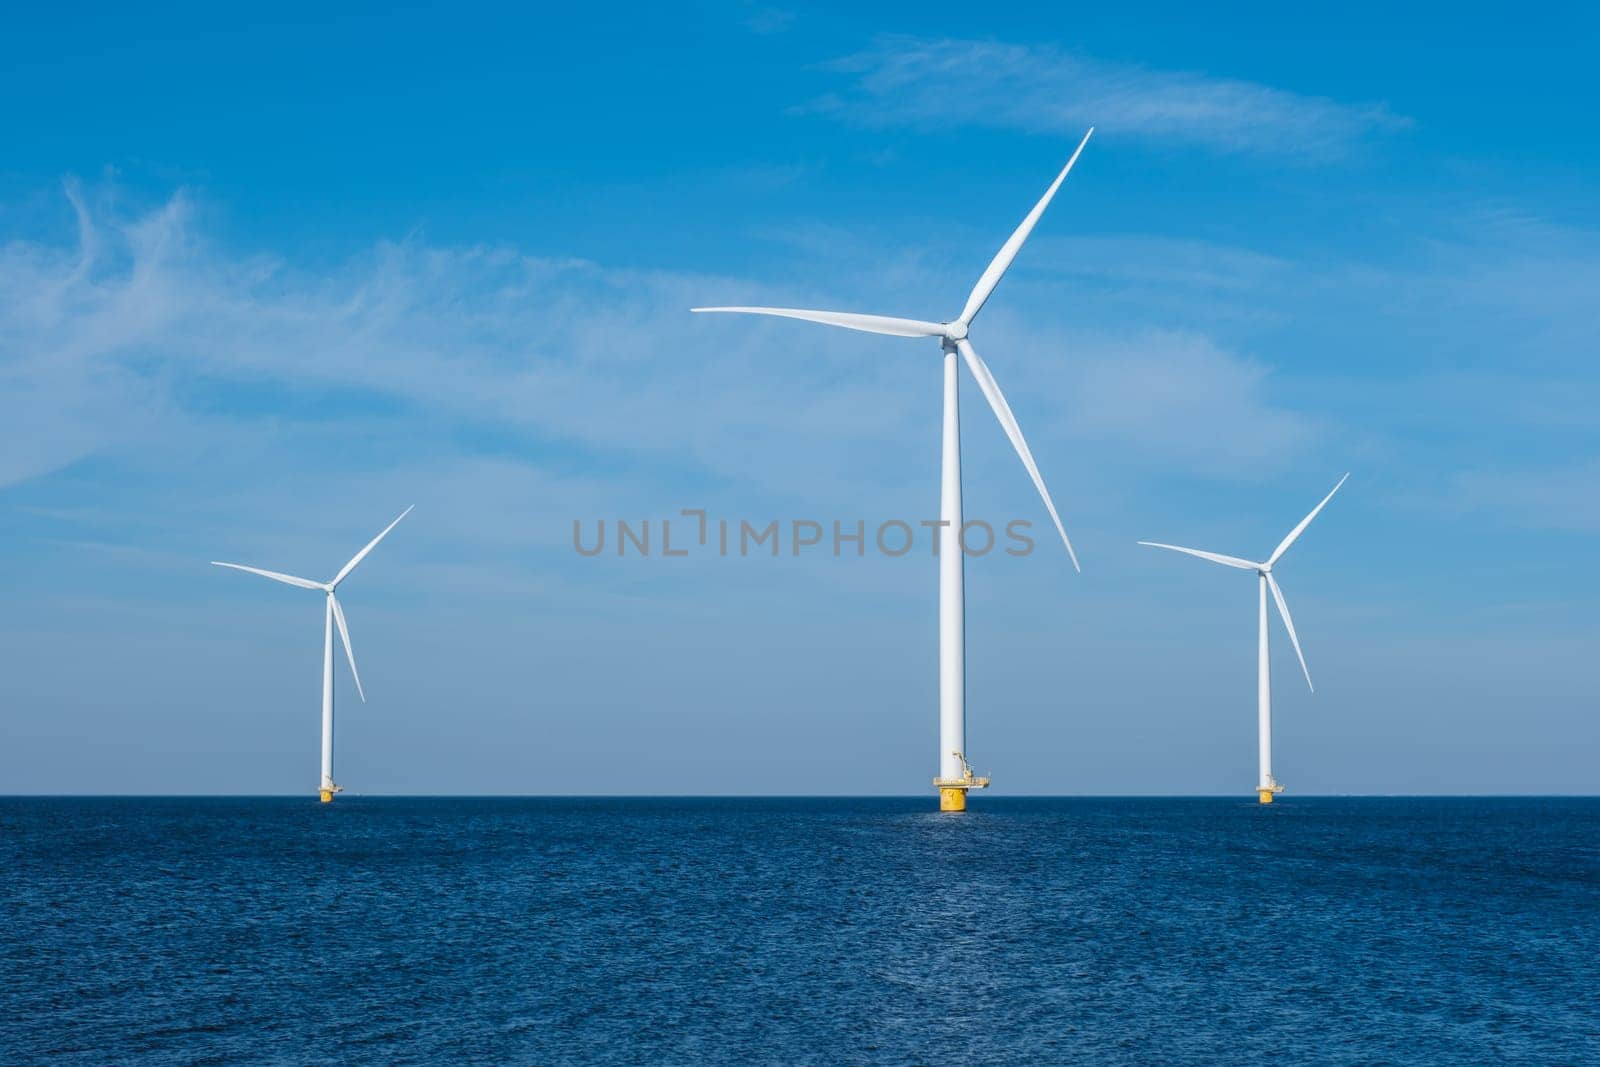 A group of elegant wind turbines stands tall in the ocean in the Netherlands Flevoland, harnessing the power of the wind to generate renewable energy by fokkebok